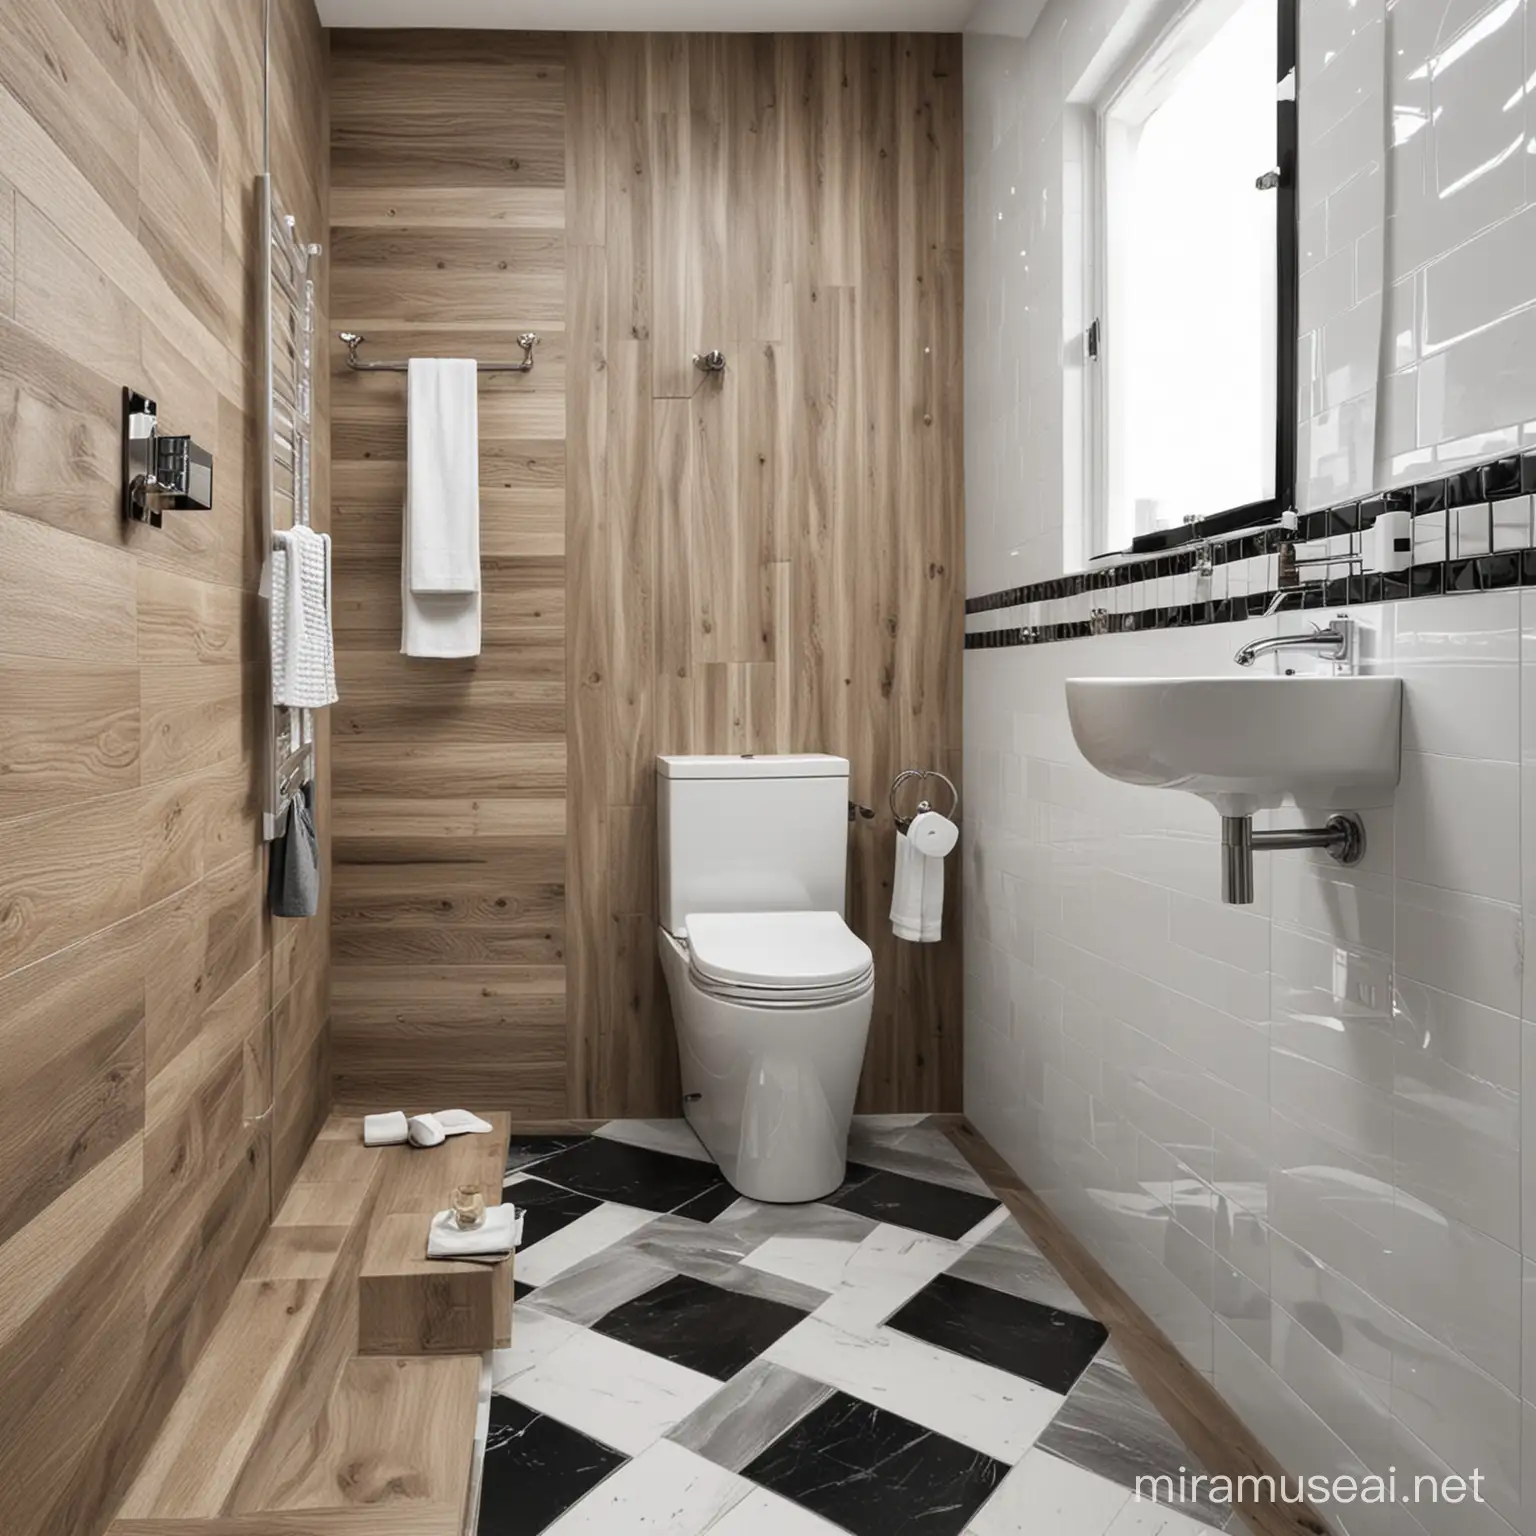 mansarde little bathroom with wood tiles on the walls, with black and white tiles on the floor, with white and grey tiles on the walls also